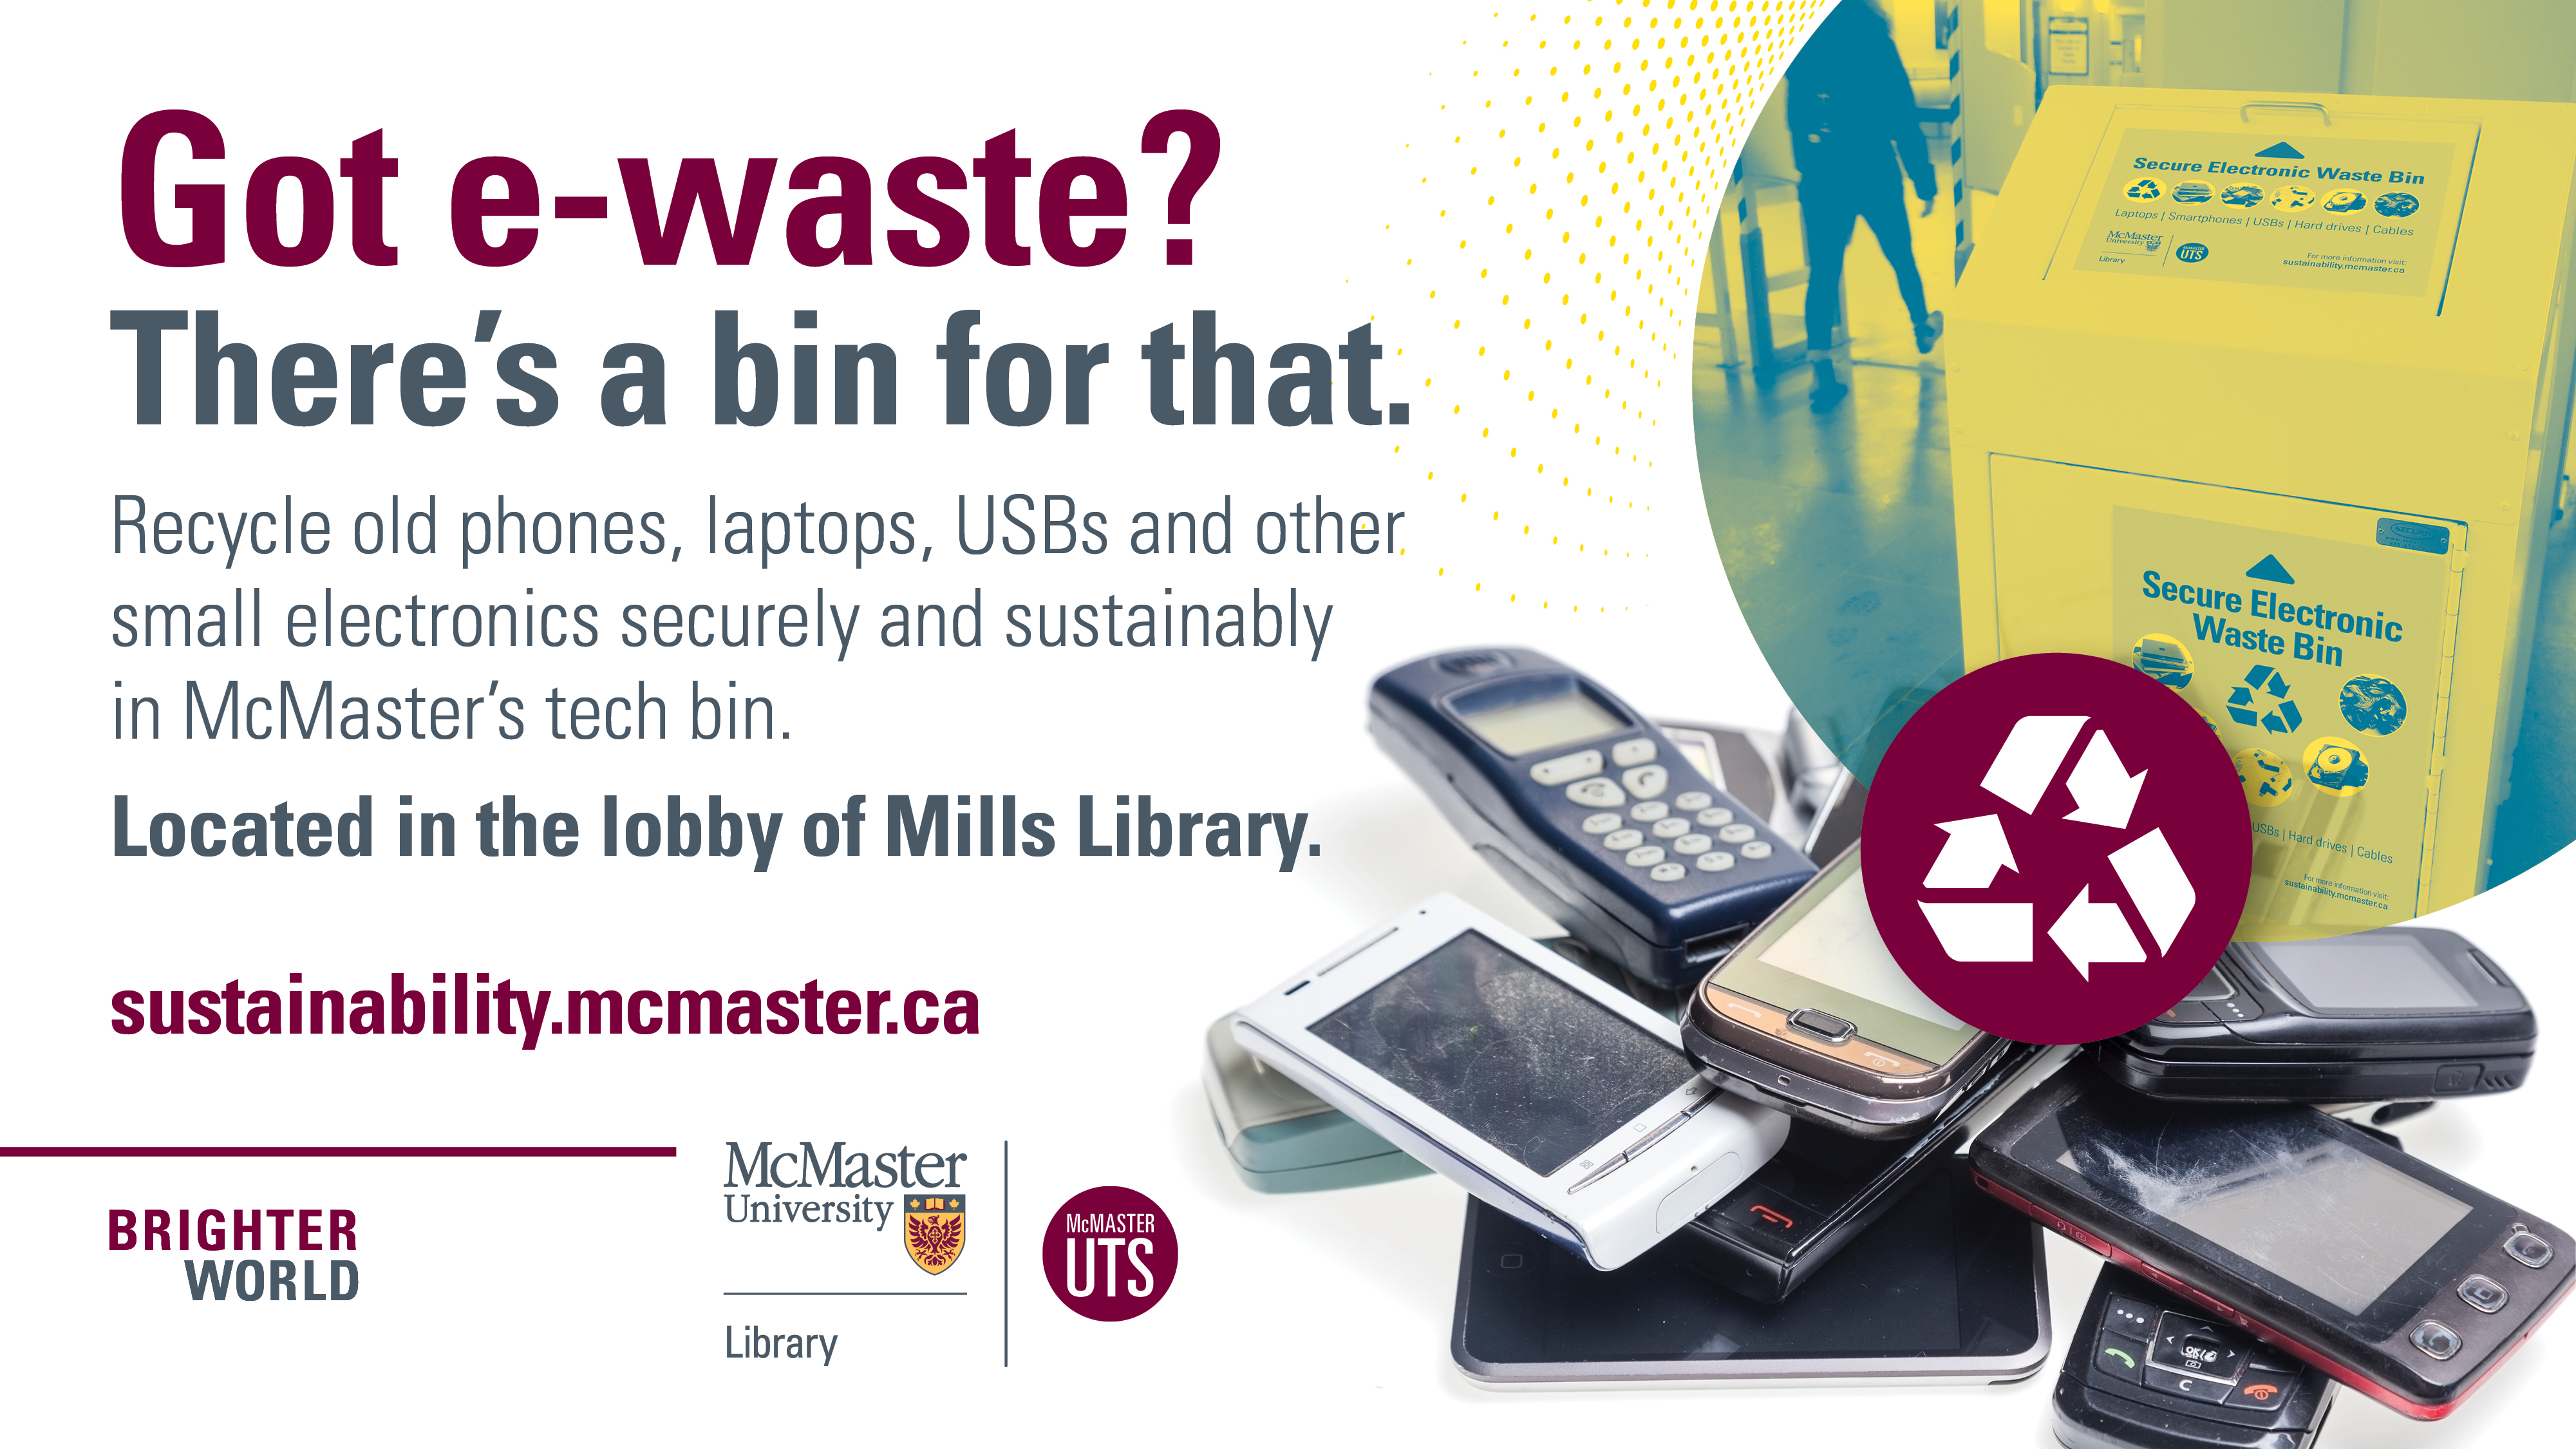 Poster advertising a new e-waste bin located in Mills Library